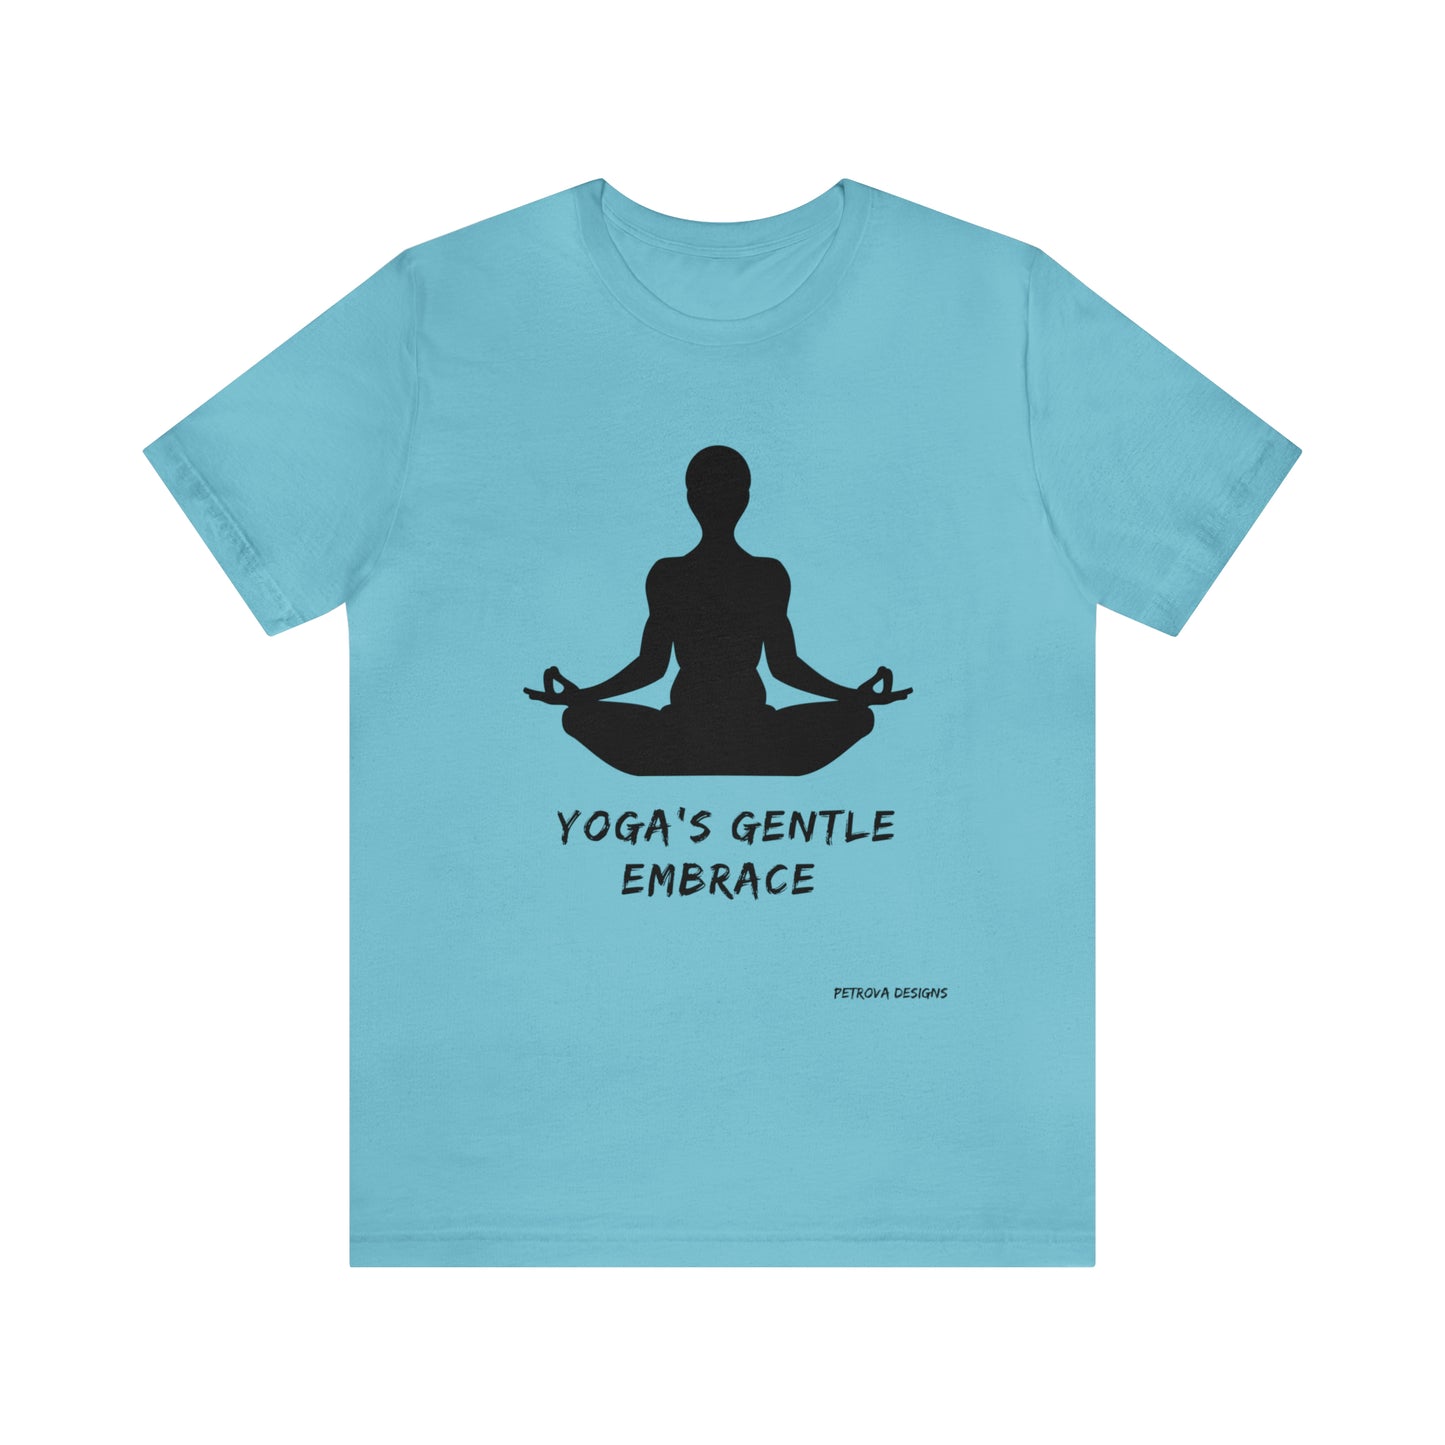 Turquoise T-Shirt Tshirt Design Gift for Friend and Family Short Sleeved Shirt Yoga Petrova Designs